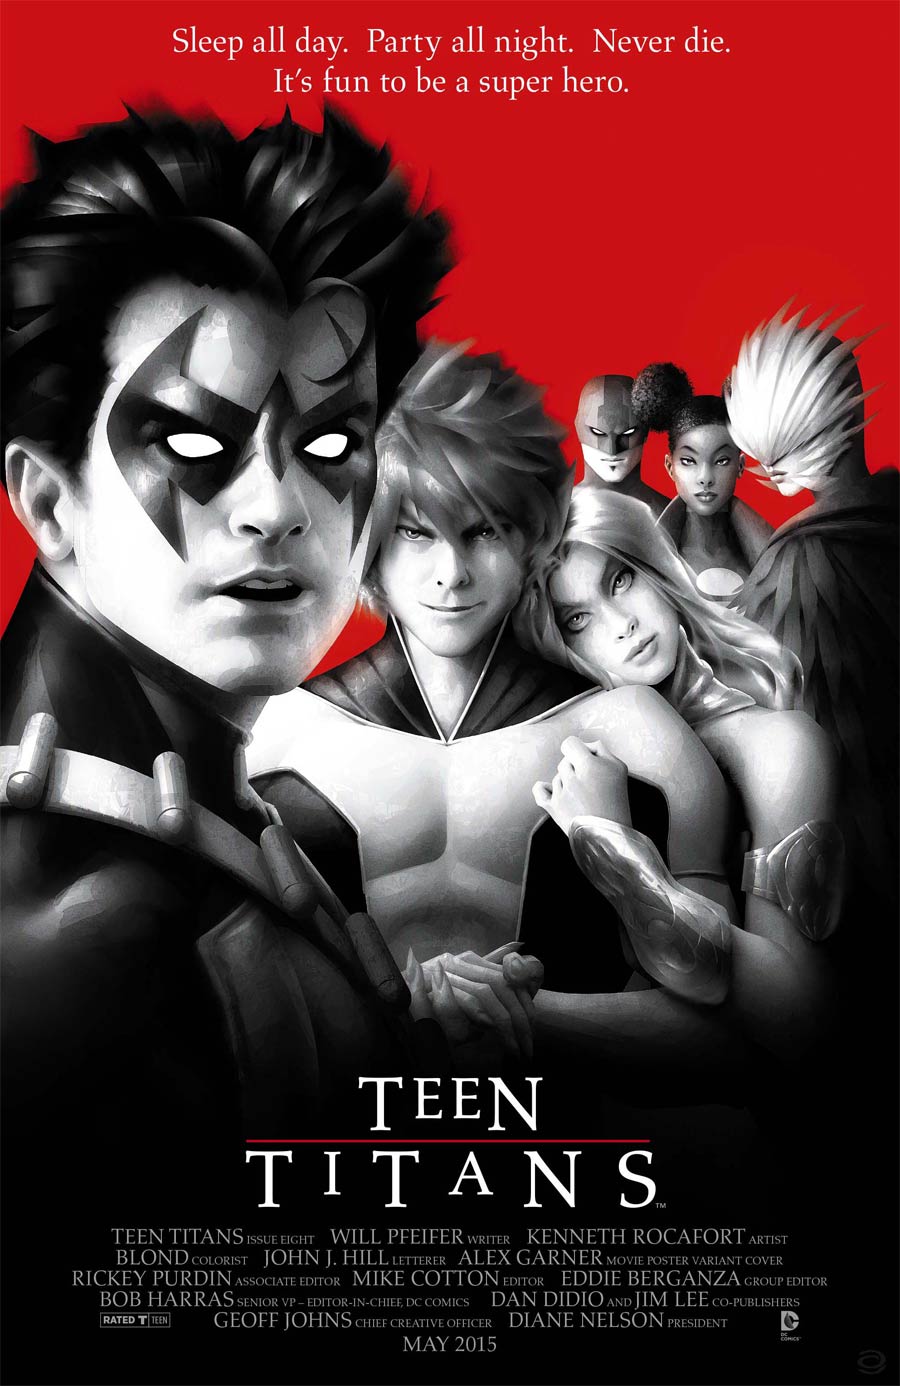 Teen Titans Vol 5 #8 Cover B Variant Lost Boys WB Movie Poster Cover